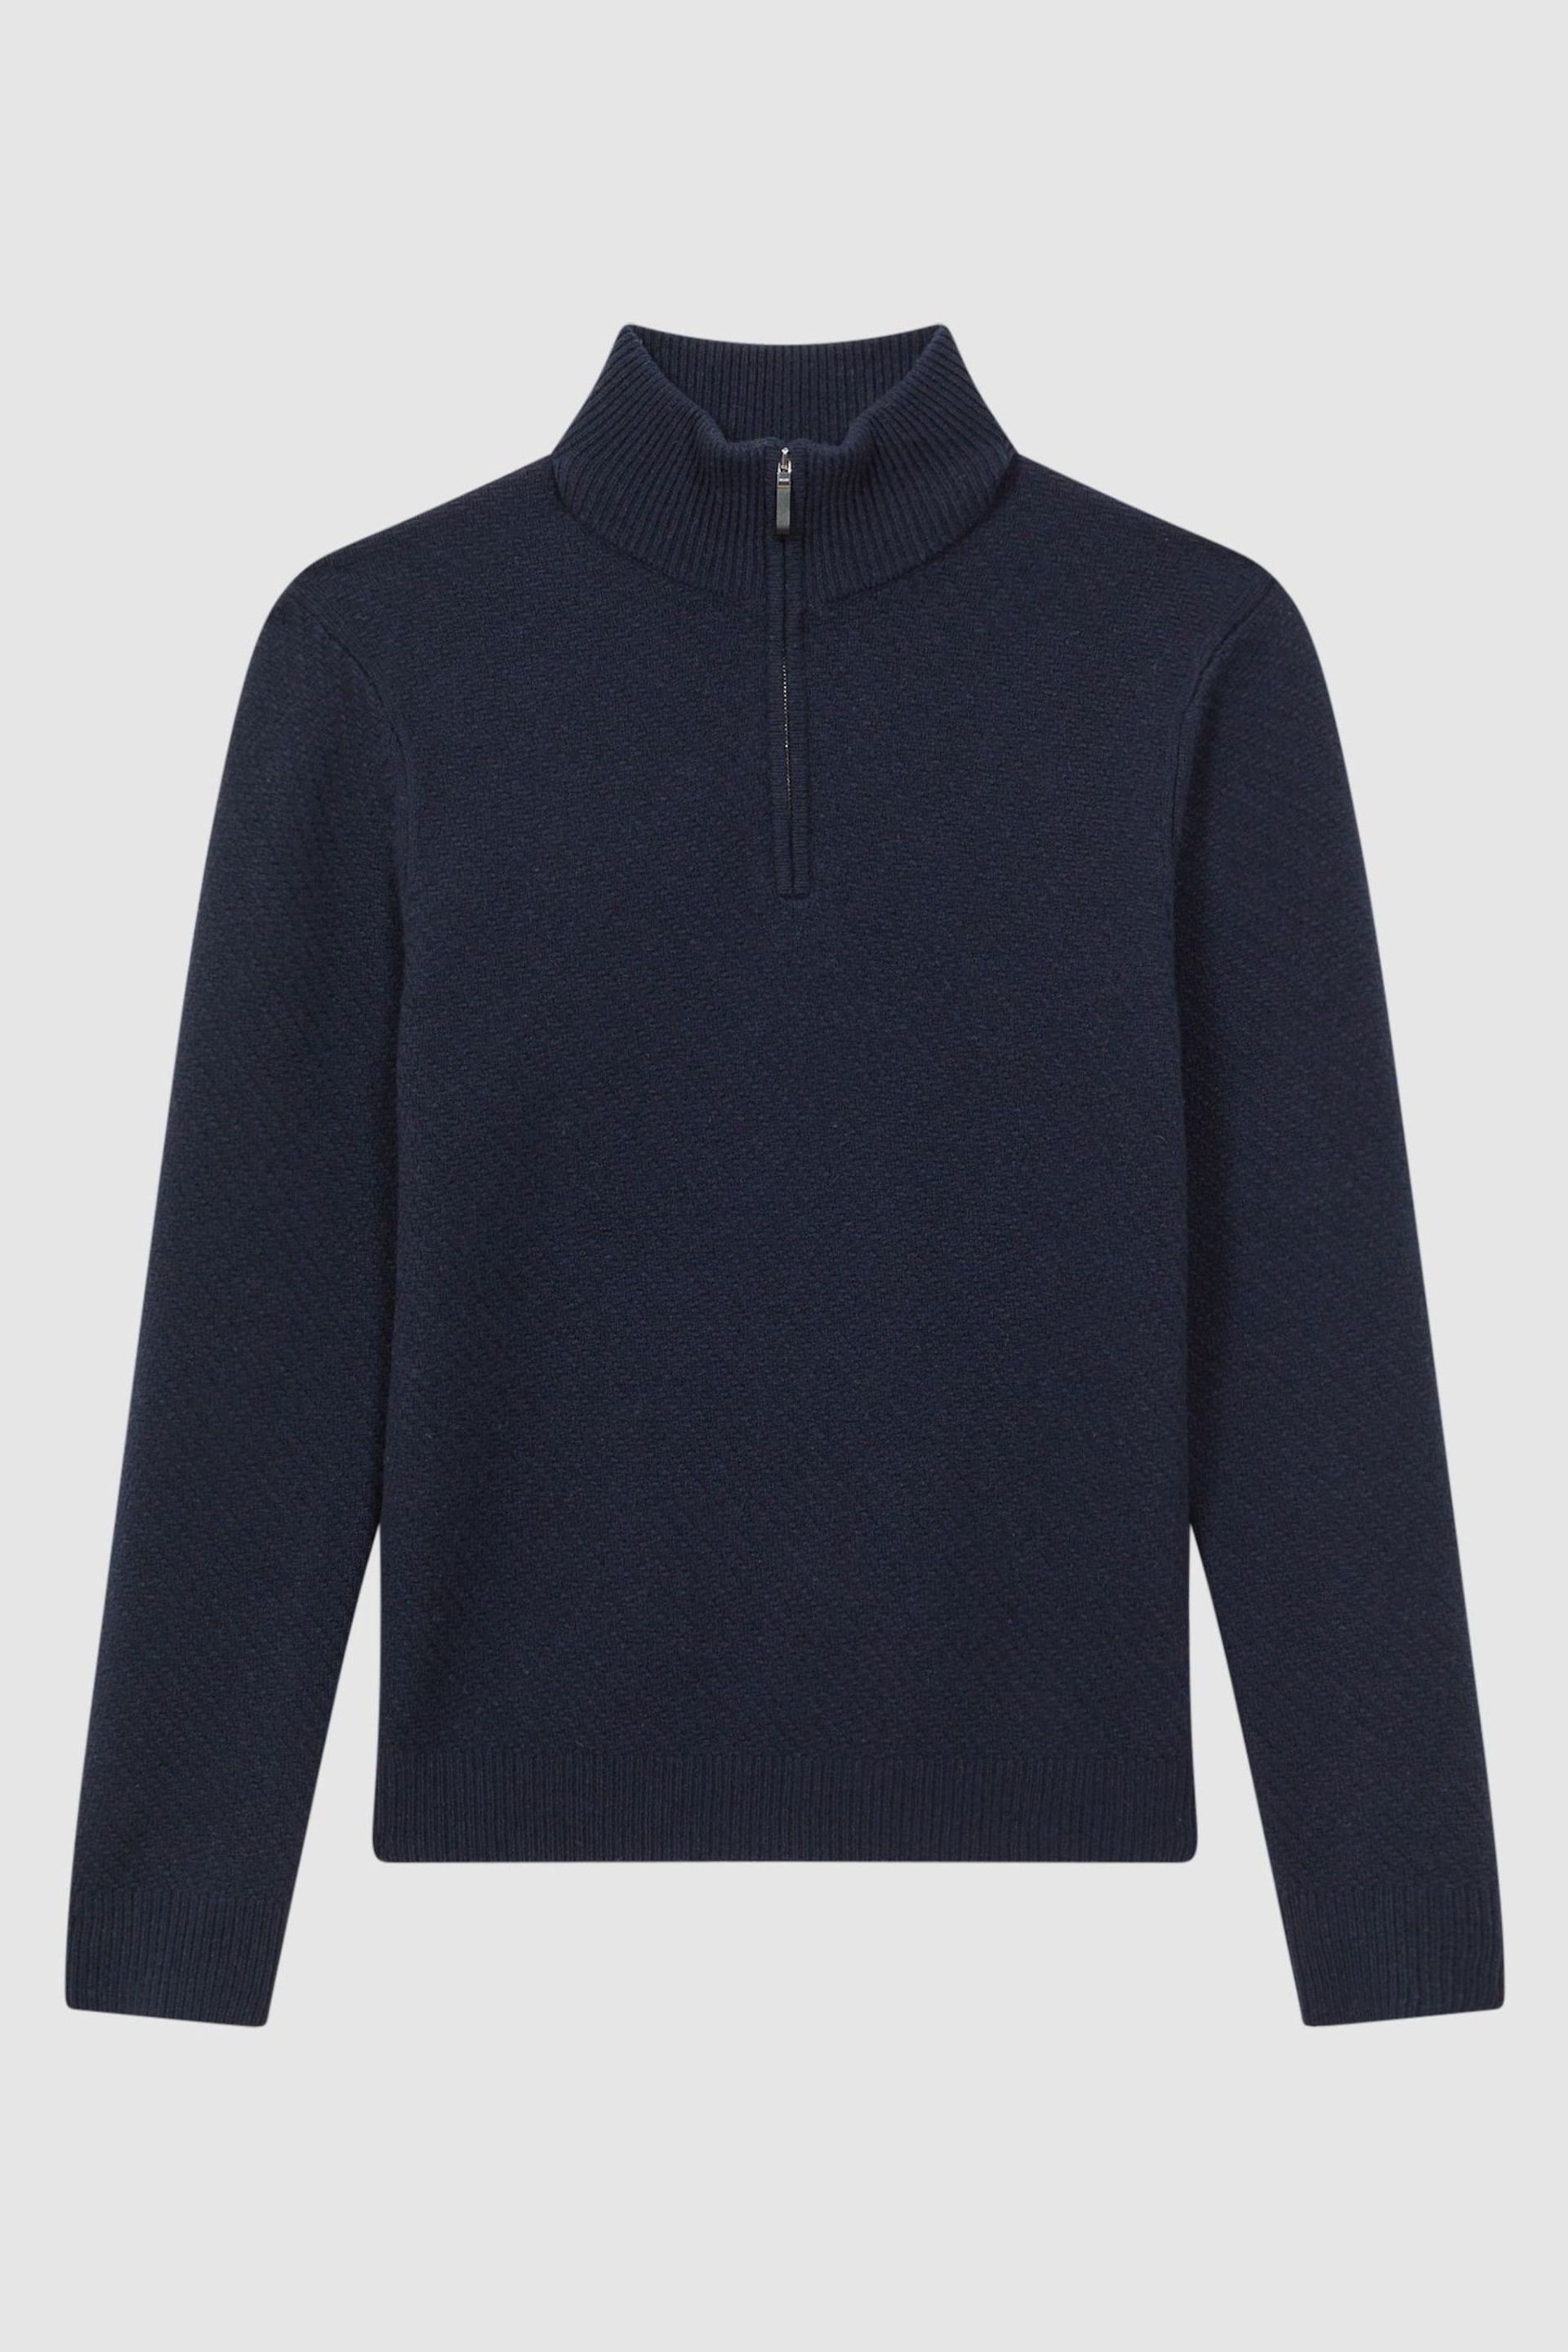 Reiss Navy Tempo Slim Fit Knitted Half-Zip Funnel Neck Jumper - Image 2 of 5